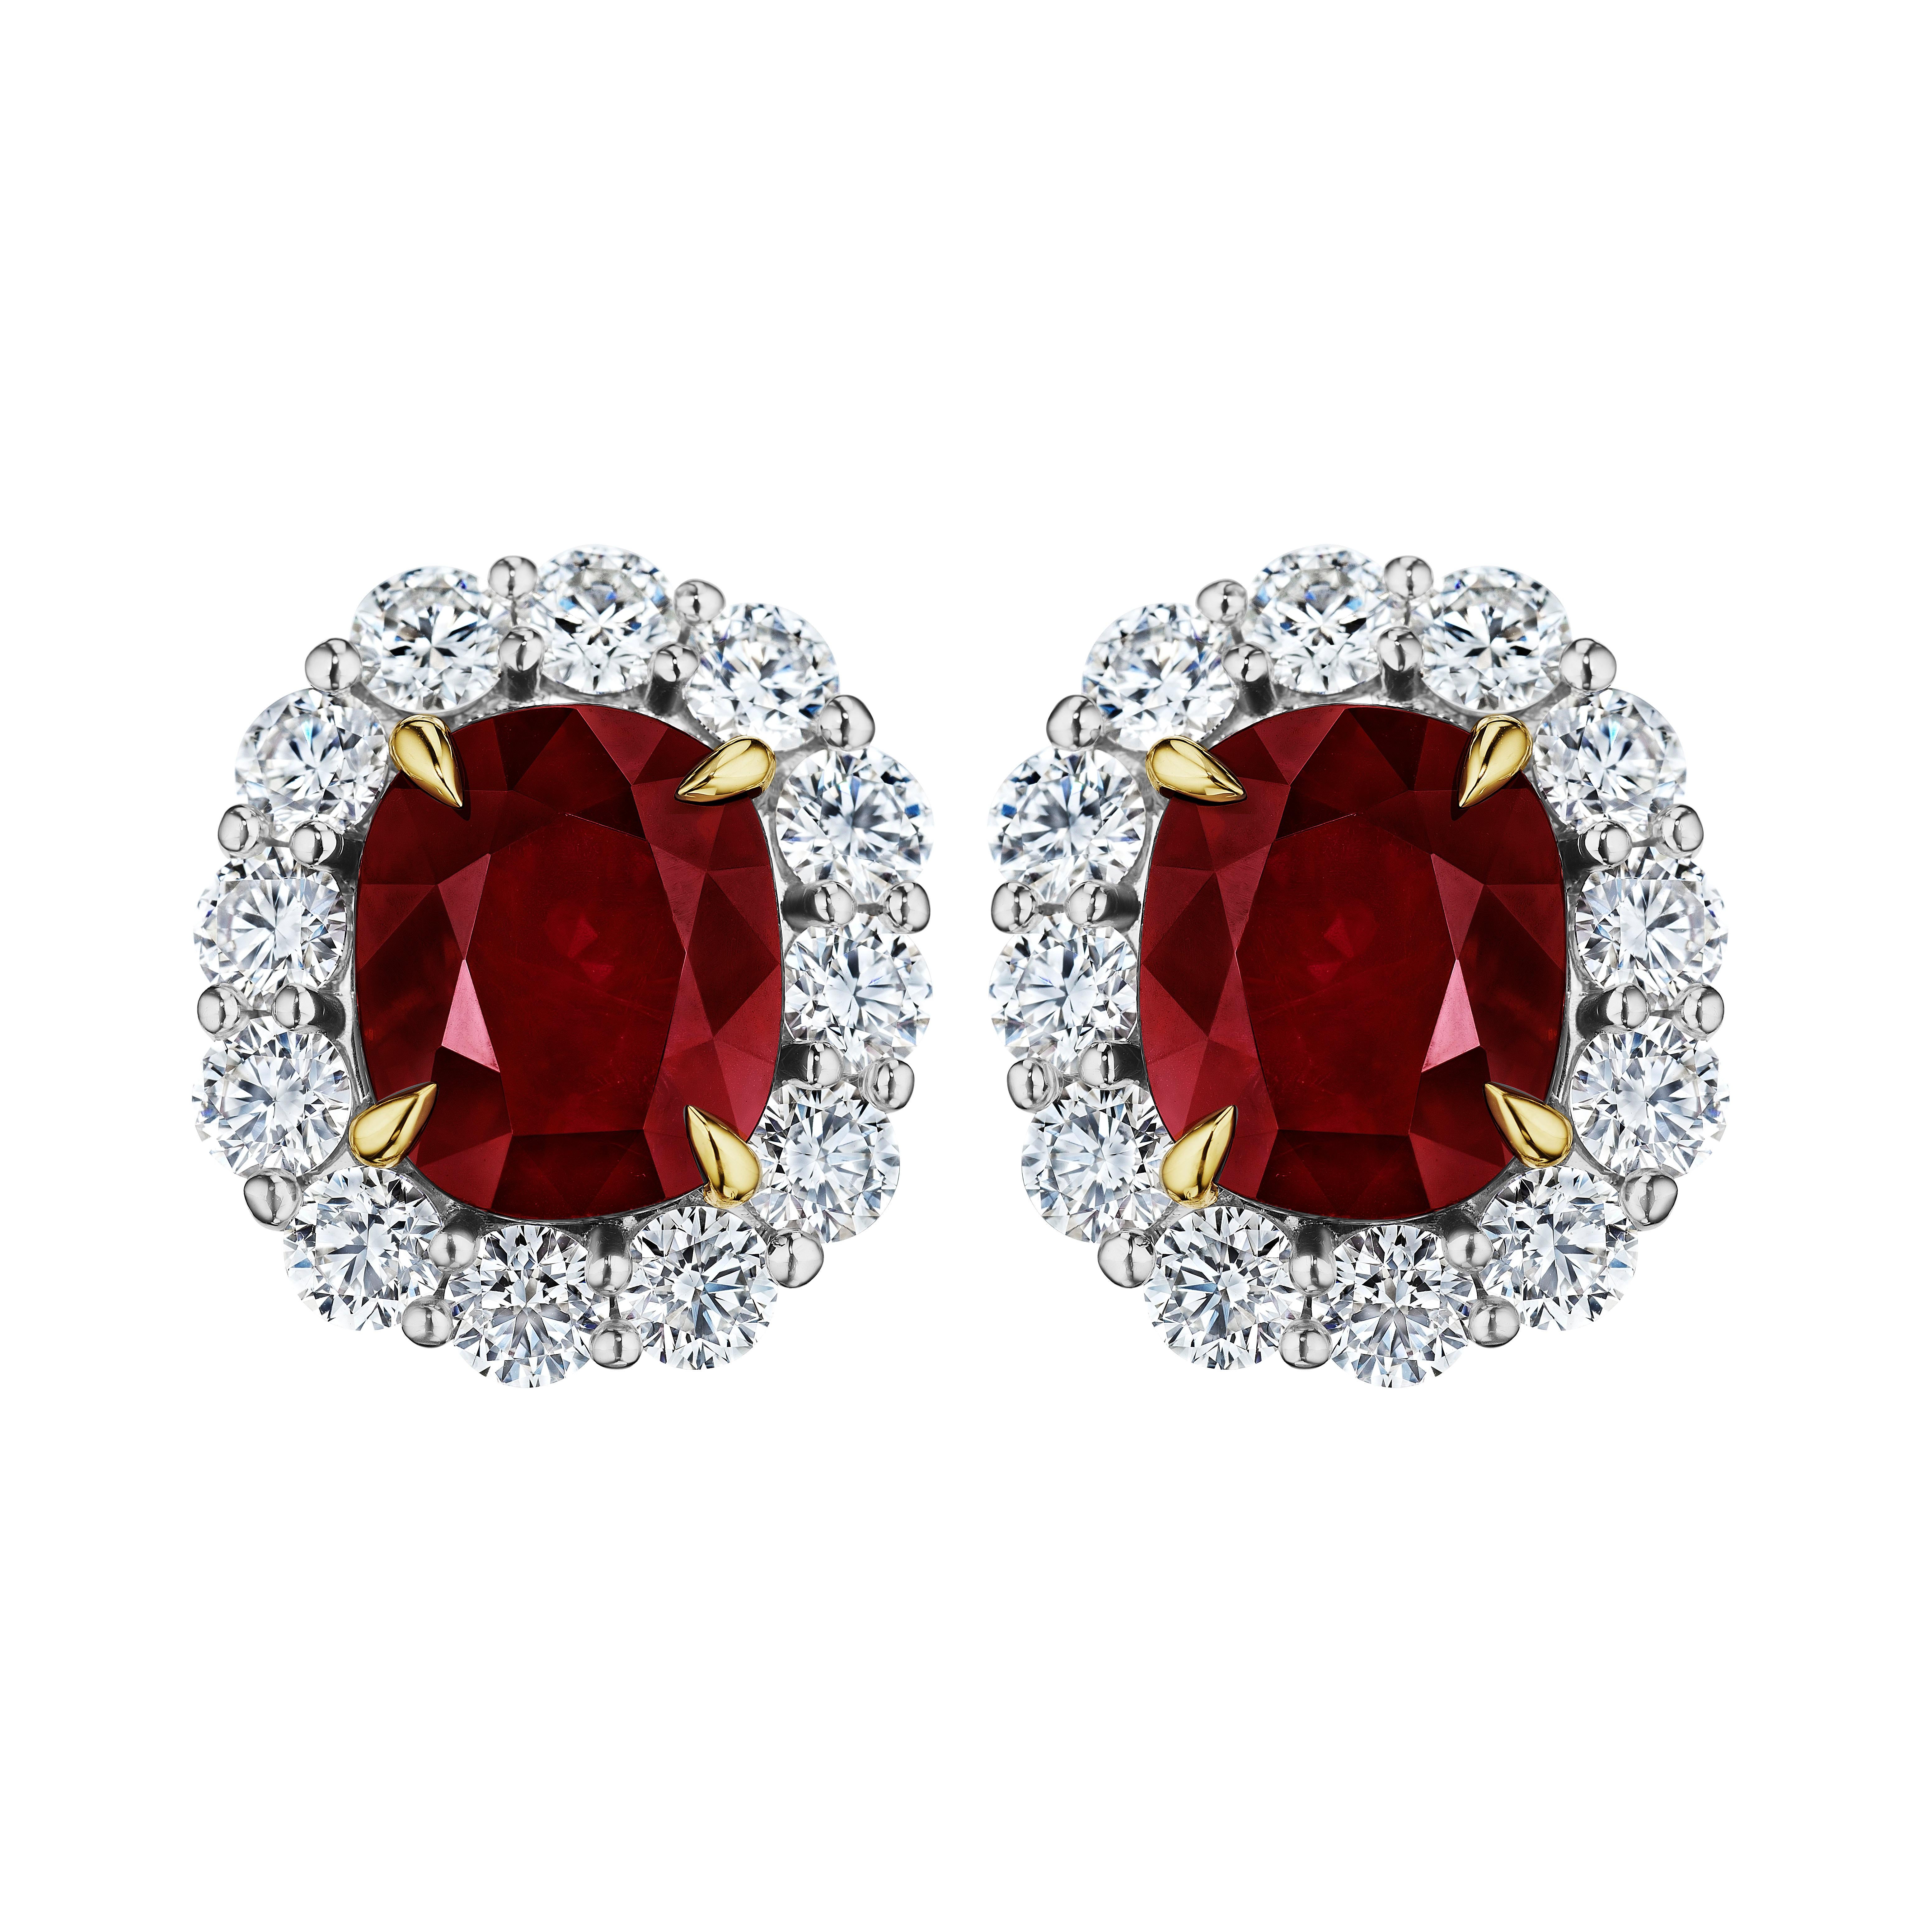 •	13.34 Carats
•	Platinum & 18KT Two Tone

•	Number of Cushion Rubies: 2
•	Carat Weight: 9.81ctw
•	Color: Vivid- Deep Red / Pigeon’s Blood
•	Origin: Burma
•	Stone Measurements: 10.70 x 8.71mm & 10.83 x 8.63mm
•	Certificate: GRS2022-090054

•	Number